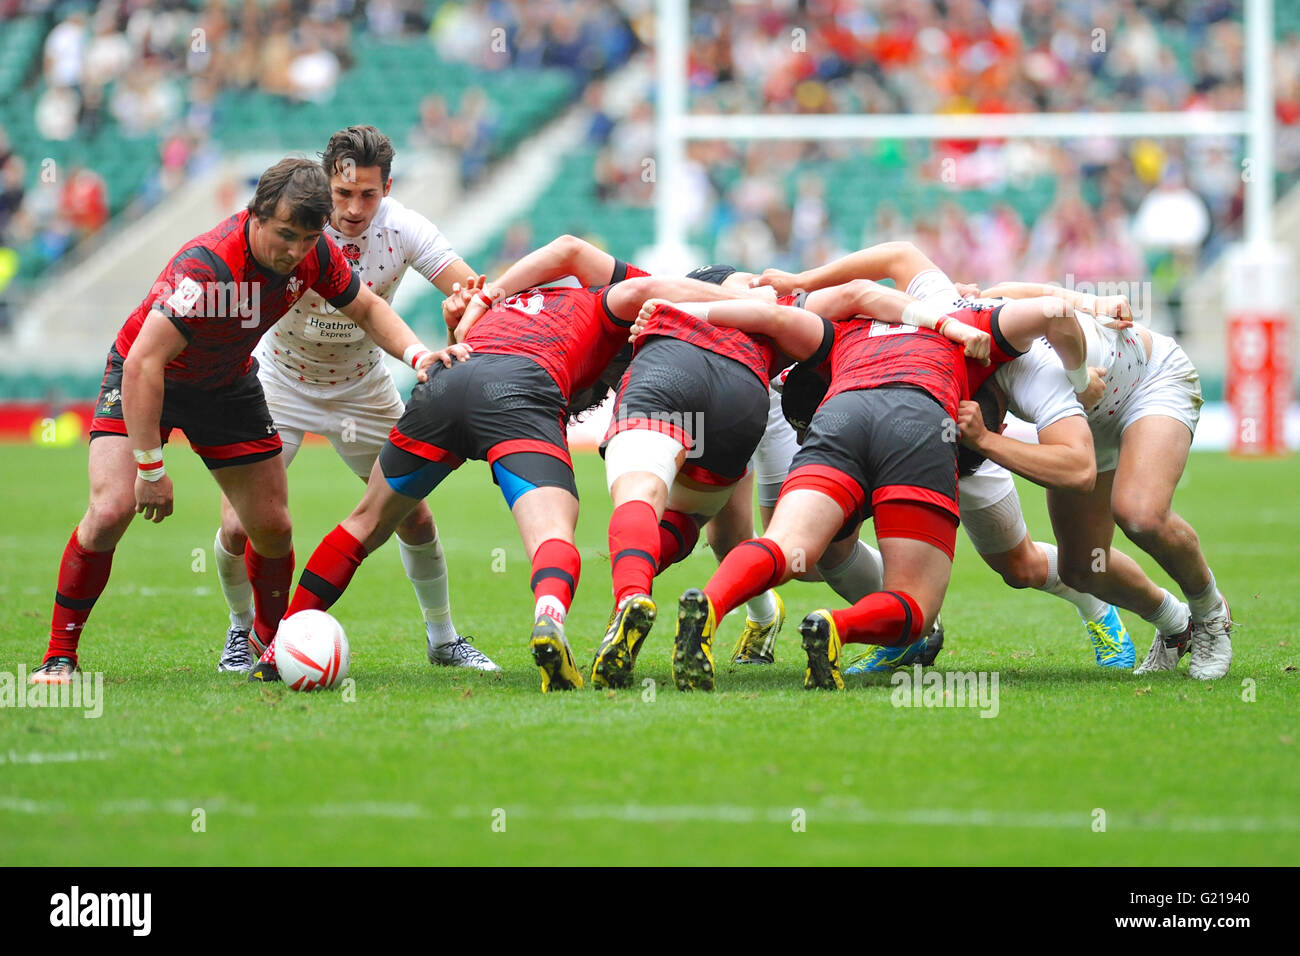 London, UK. 21st May, 2016. Rhodri Williams (WAL)  looking to pass the ball after a scrum with England during their pool match, HSBC World Rugby Sevens Series, Twickenham Stadium, London, UK. England went on to win the match 24-5. Credit:  Michael Preston/Alamy Live News Stock Photo